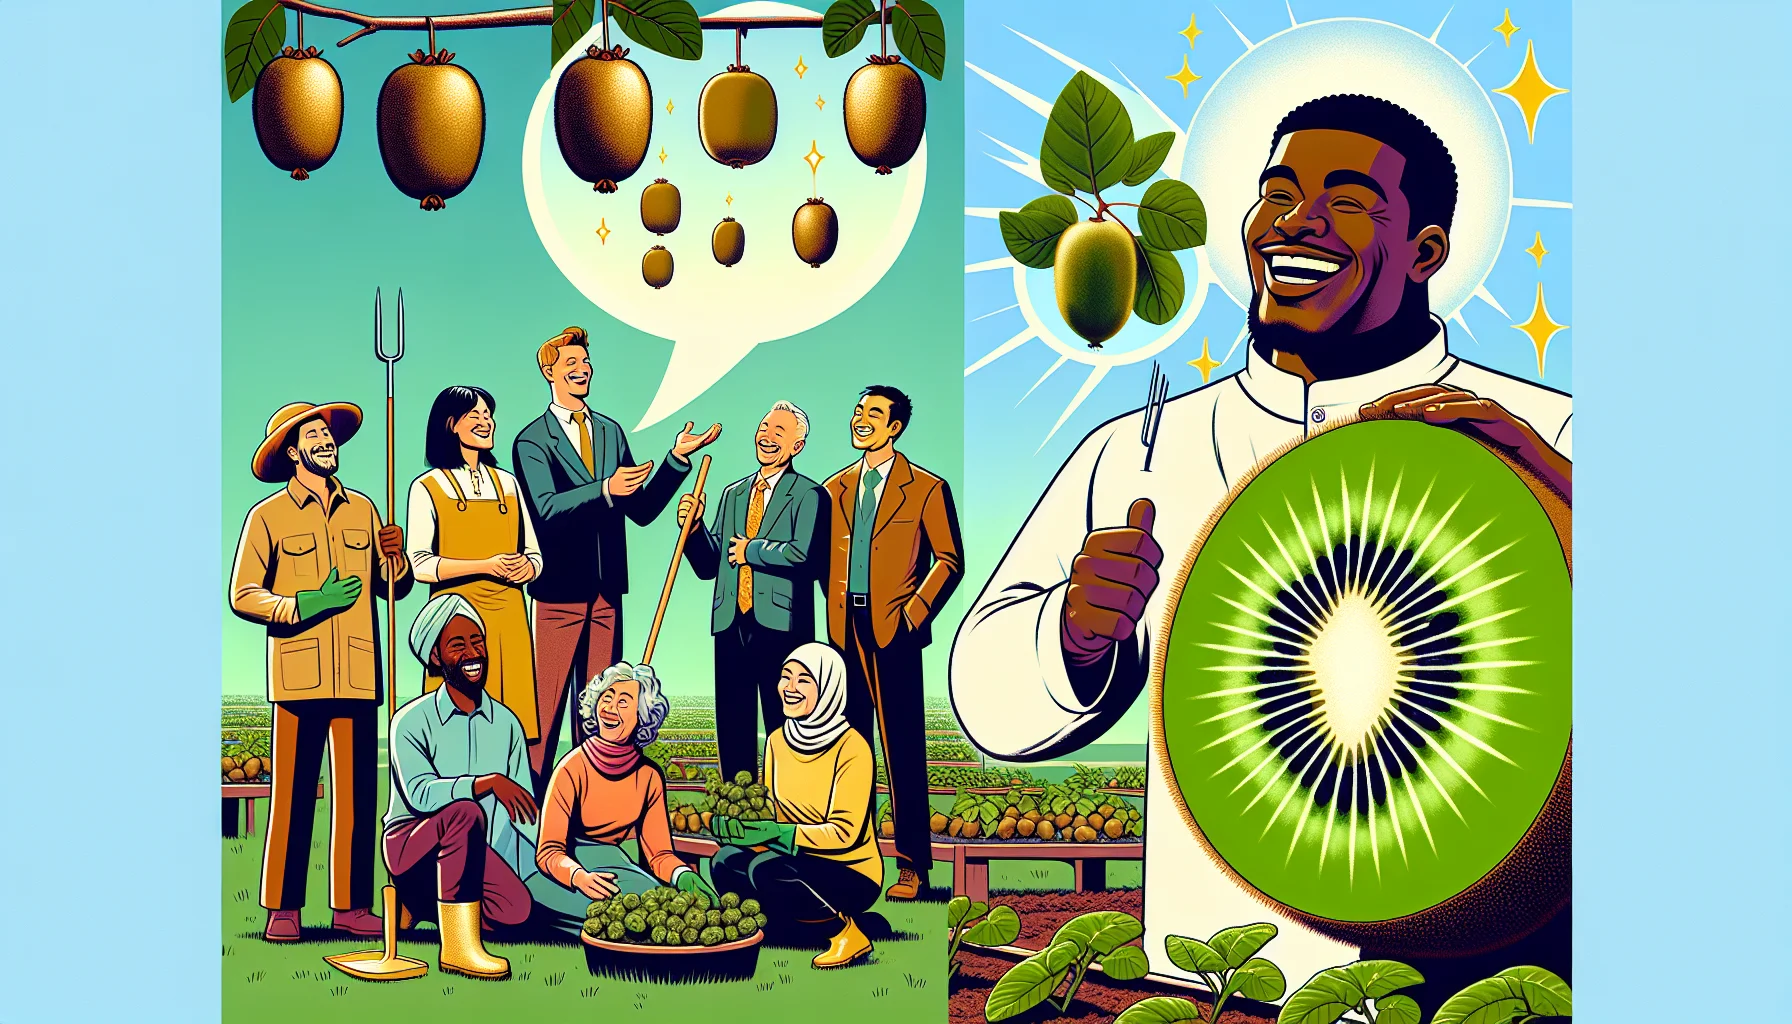 Generate an amusing, realistic scene of a diverse group of people of various descents and genders such as Caucasian, Middle-Eastern, Black, South Asian, and Hispanic, both male and female, joyfully engaging in gardening, focusing on growing kiwi trees. Ilustrate the fruits hanging from the tree branches, ripe and ready to be harvested. Next to the gardening group, envision a huge, anthropomorphic kiwi fruit with glowing skin, flaunting an aura of health and beauty. Include a cartoon-like dialogue bubble that expresses in a comedic and compelling way how its splendid skin comes from the nutrients found in kiwi fruits.